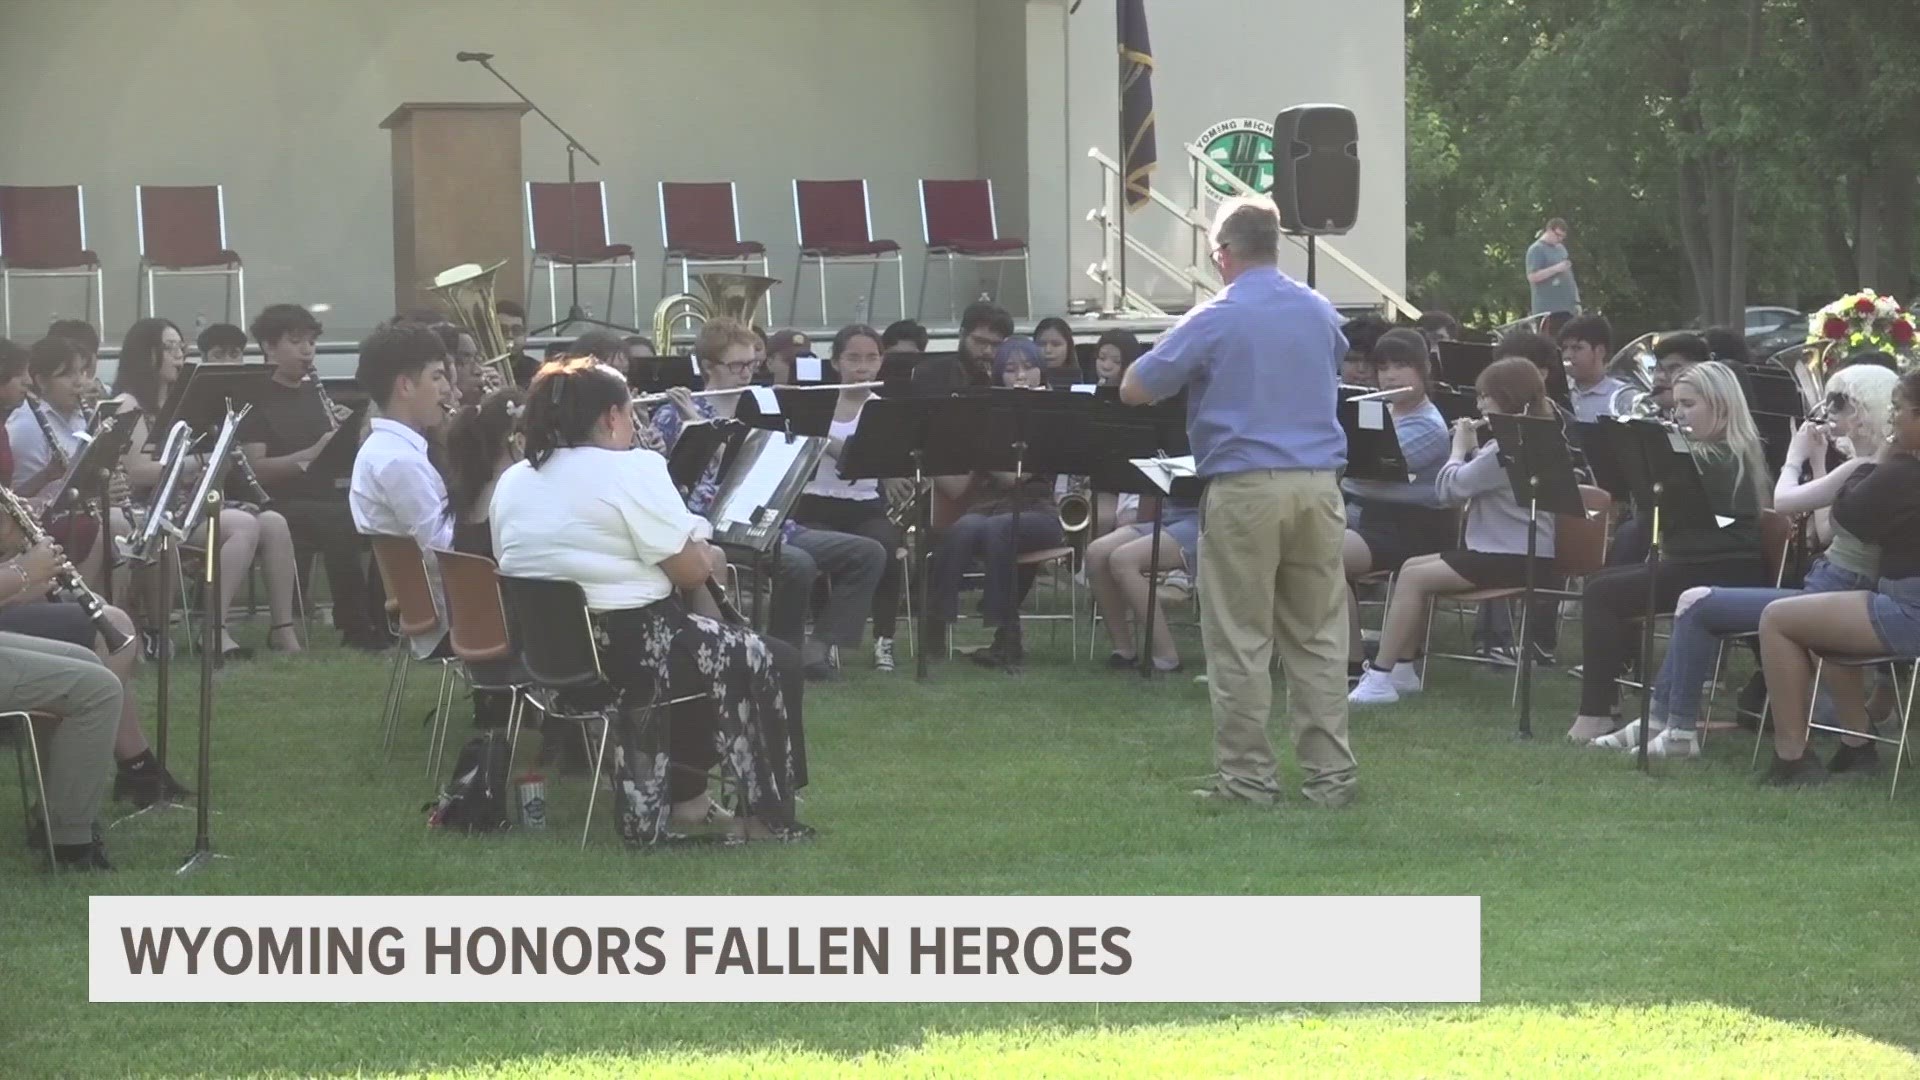 The city's Veterans Memorial Garden hosted a Memorial Day Ceremony. The Godfrey-Lee High School band performed.